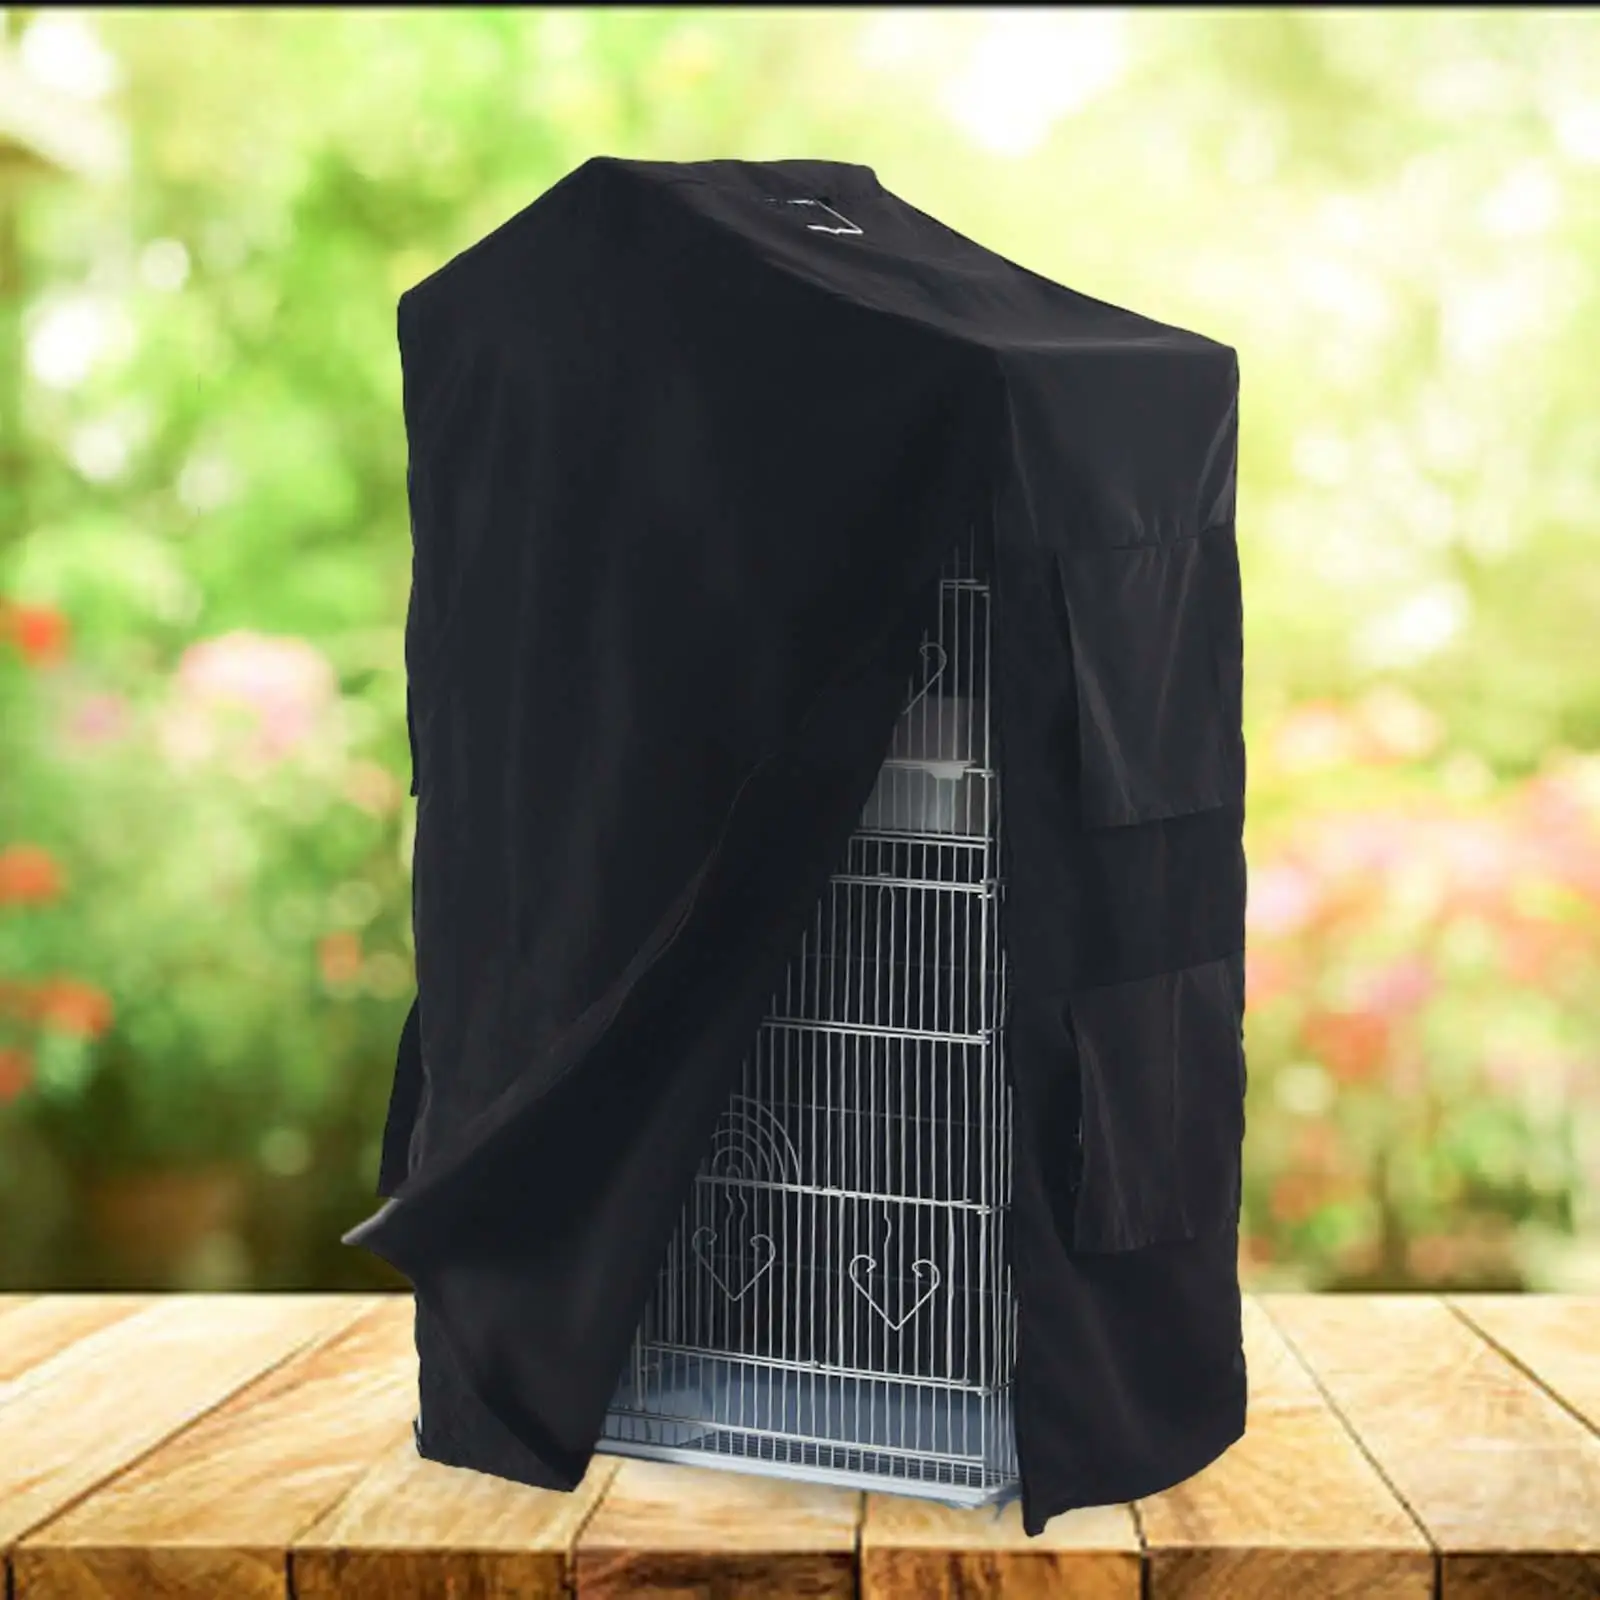 Bird Cage Cover Sunproof Bird Parrot Cage Cover Washable Good Night Windproof for Parakeets Parrot Budgies Bird Supplies